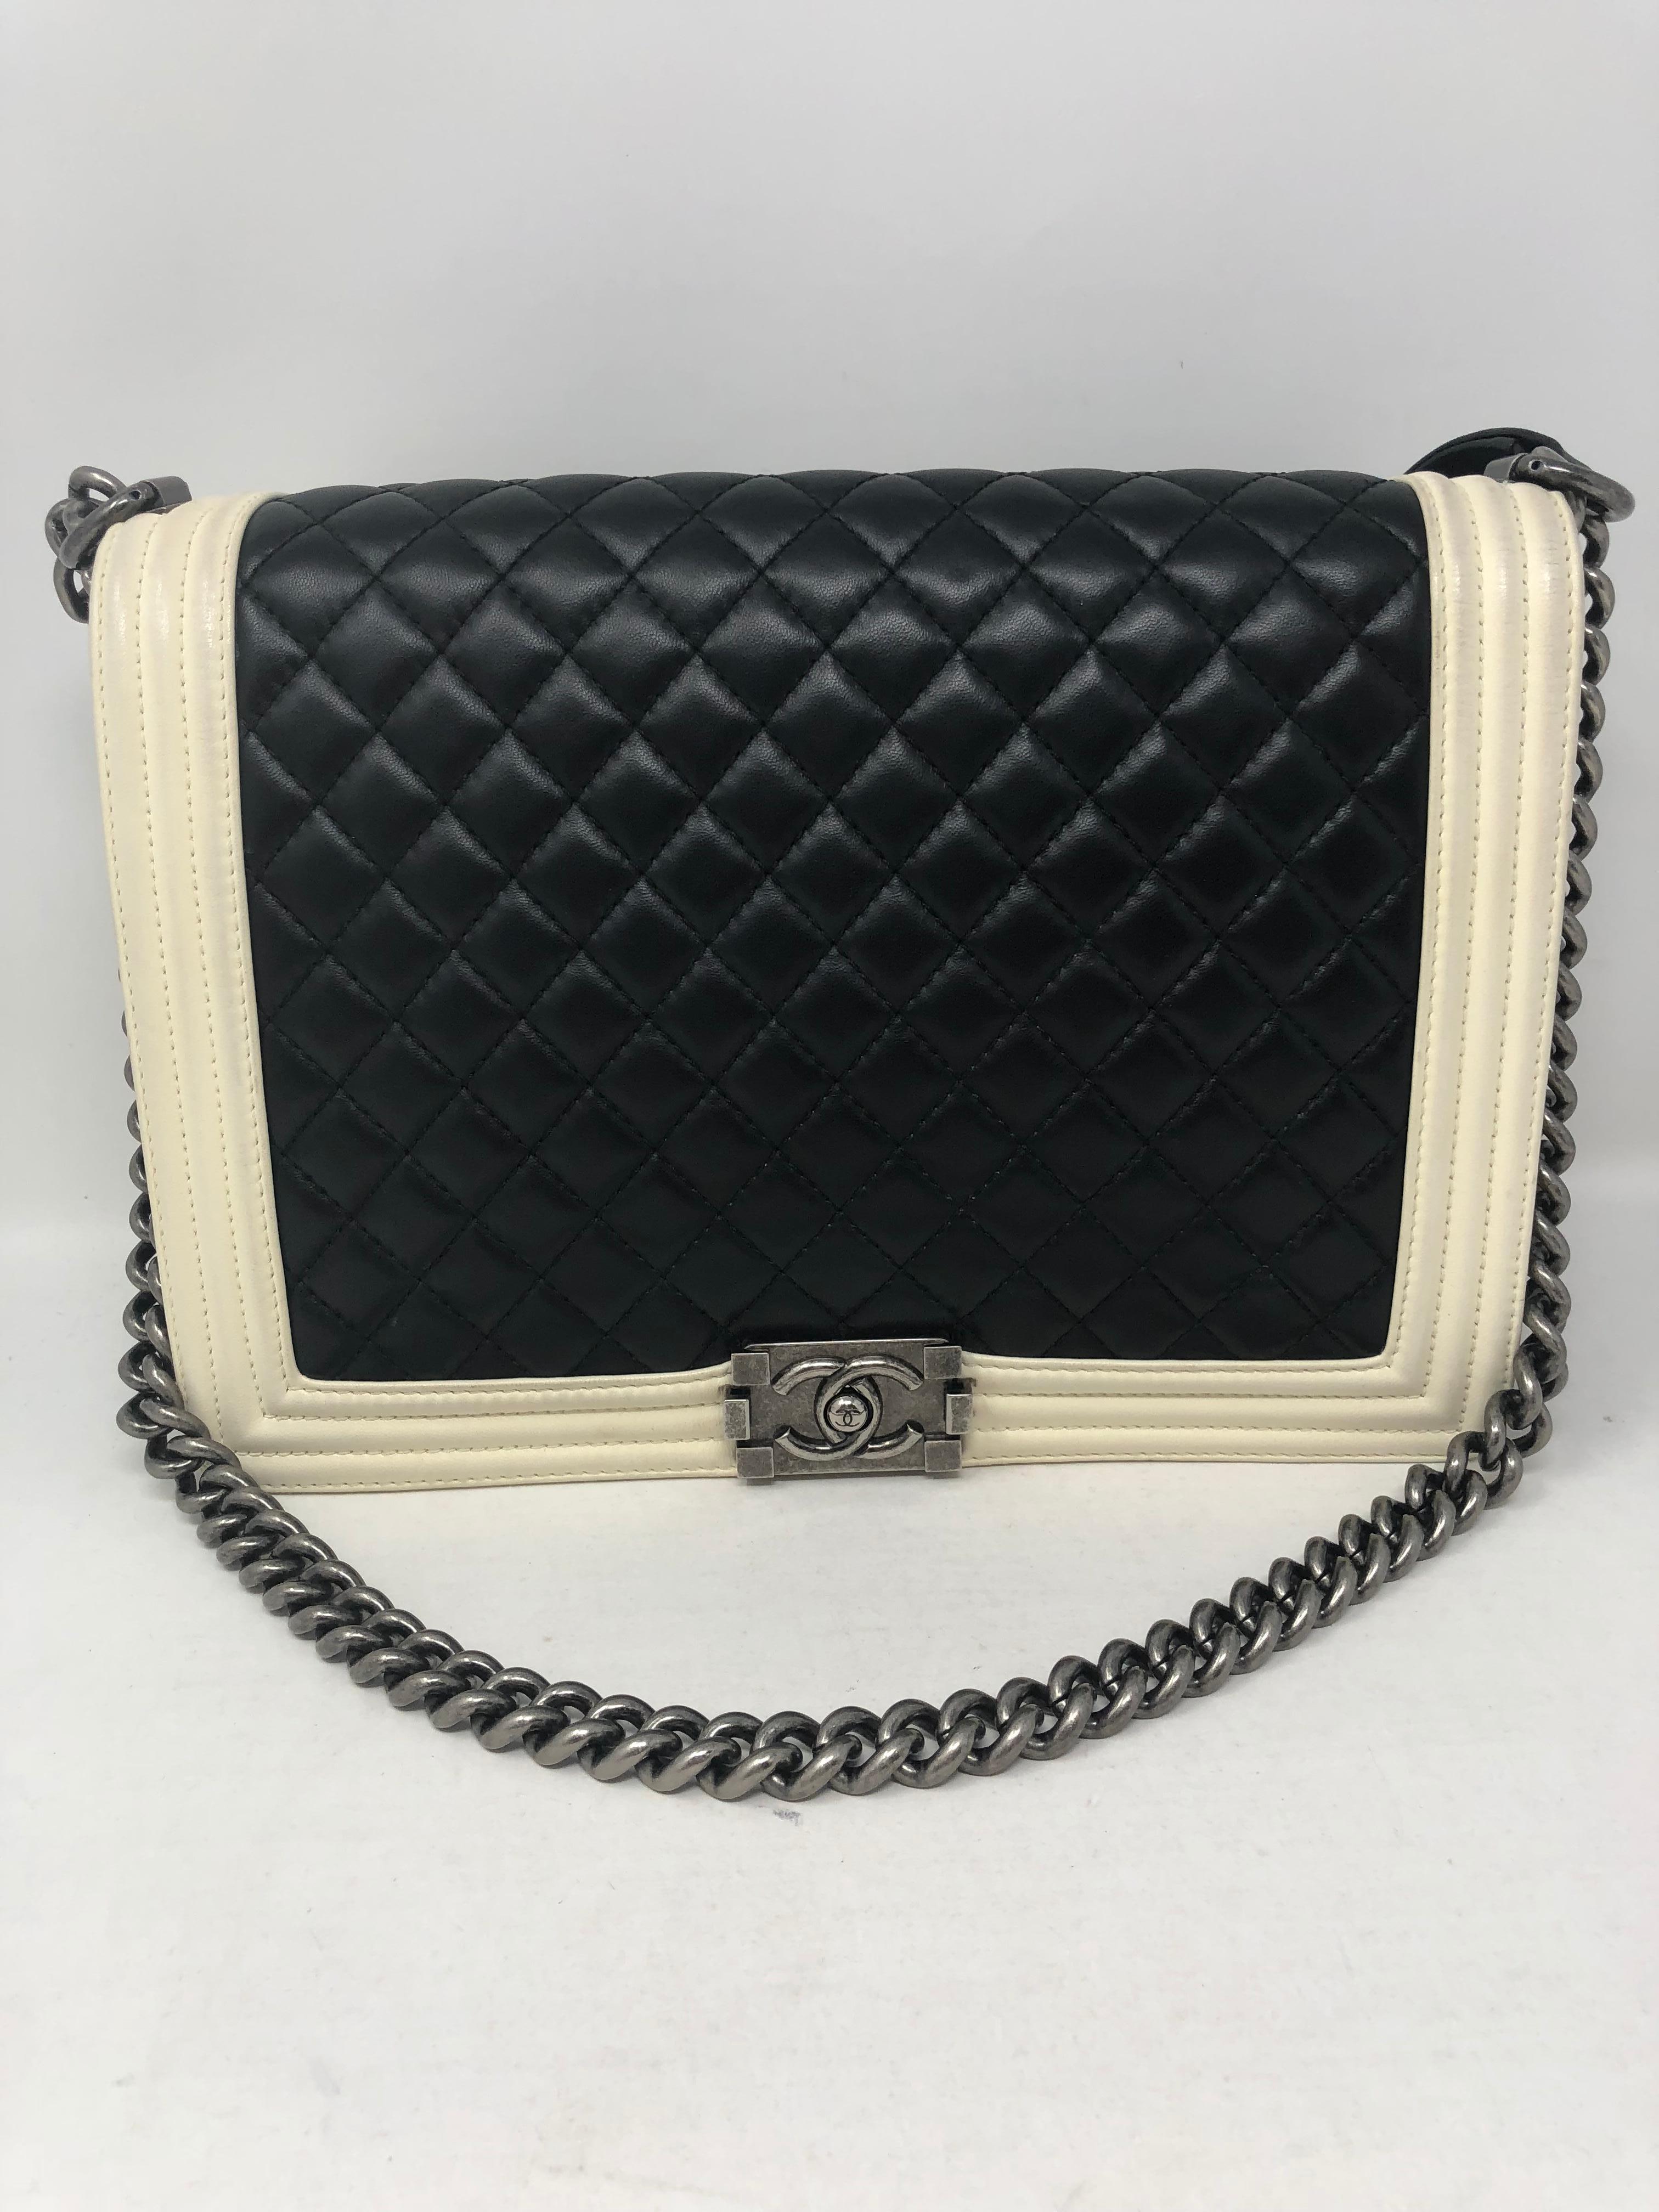 Chanel Black and White Boy Bag in Large size. Lambskin leather quilted with white trim. Antique silver hardware. Good condition with light wear on the white leather. Includes authenticity card and matching serial number inside the bag. Unique combo